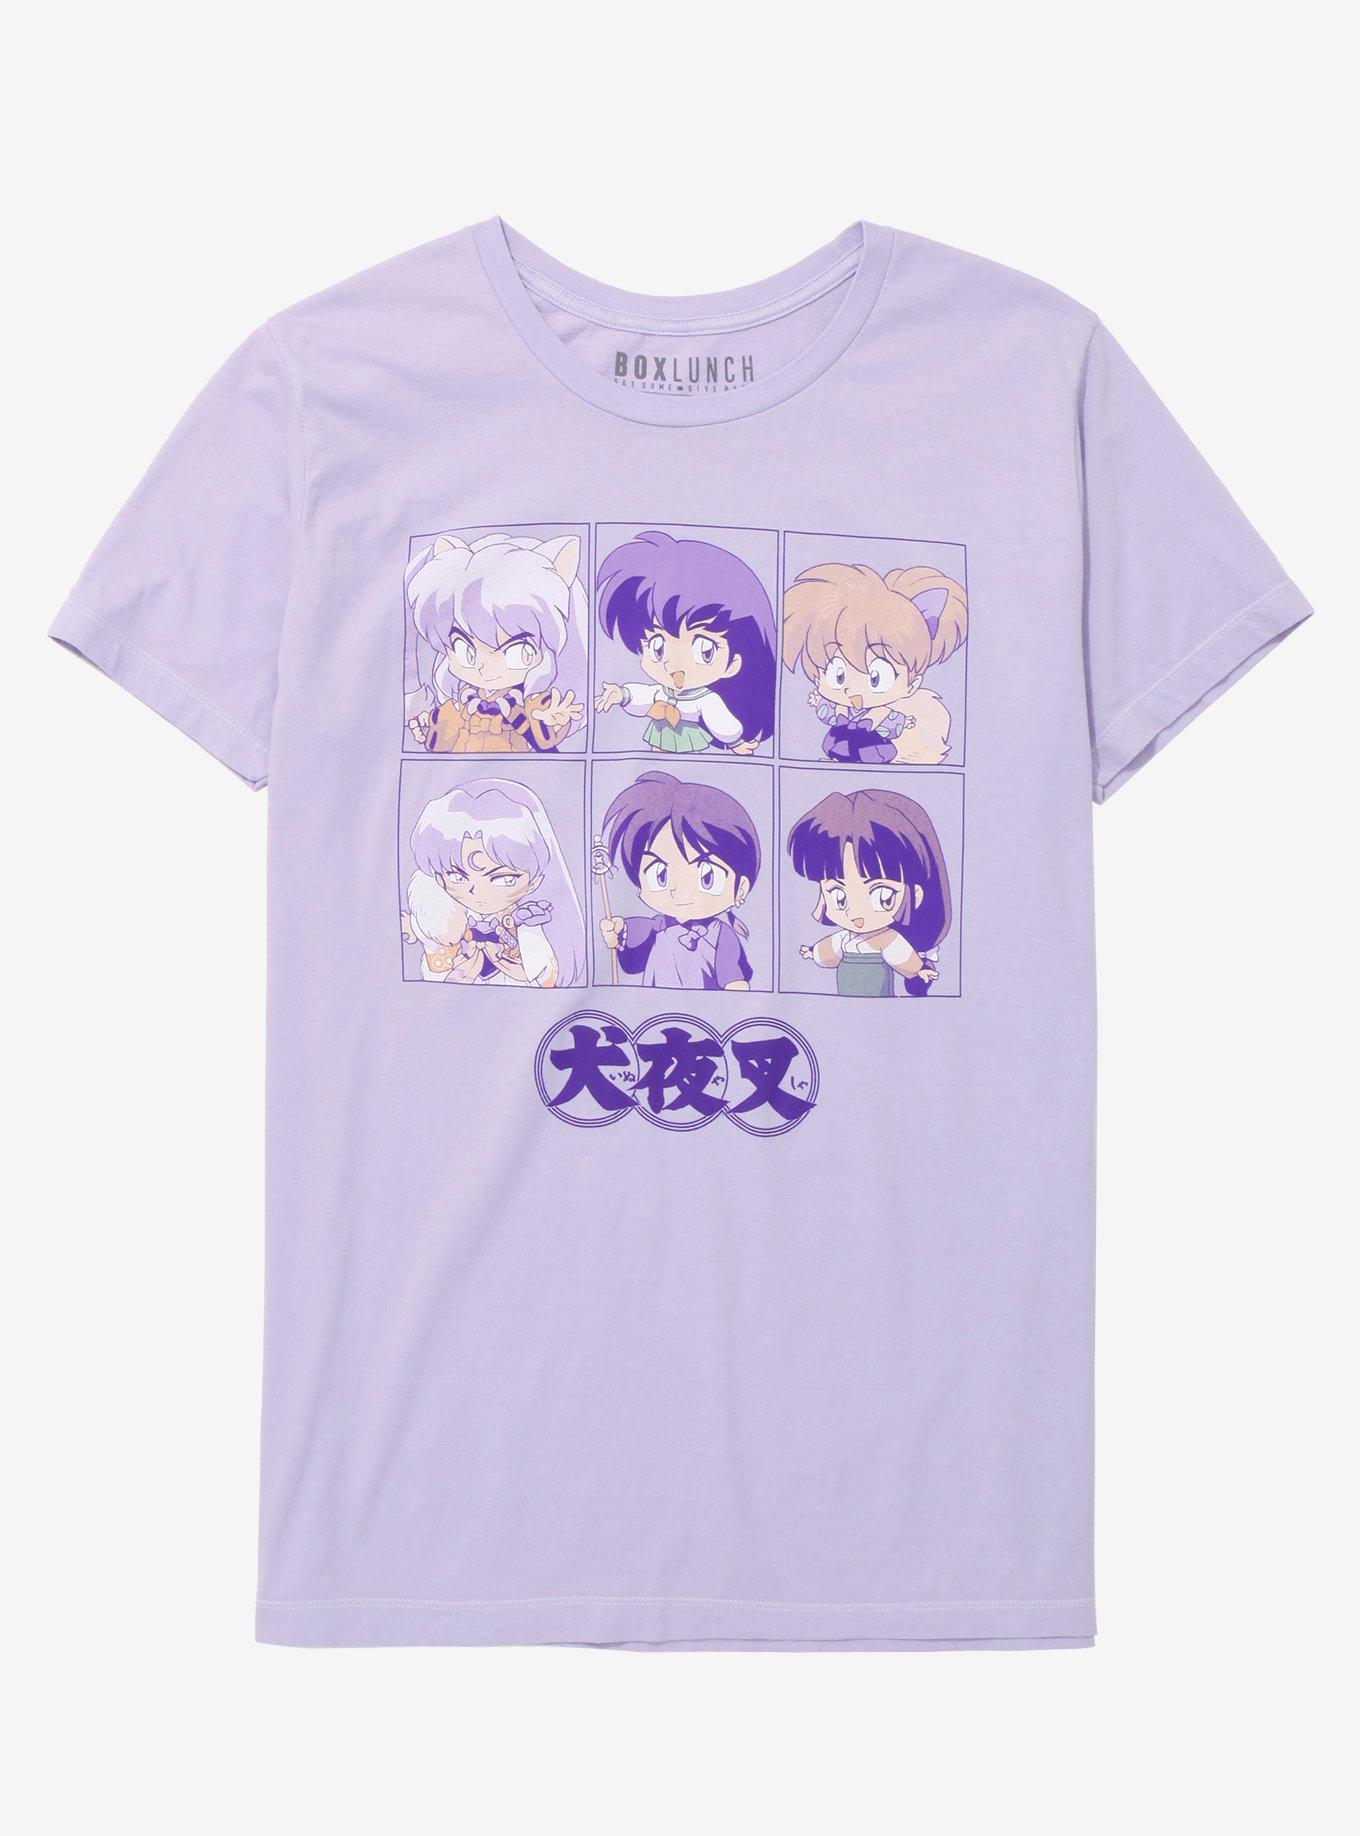 InuYasha Chibi Characters Women's T-Shirt - BoxLunch Exclusive, LAVENDER, hi-res